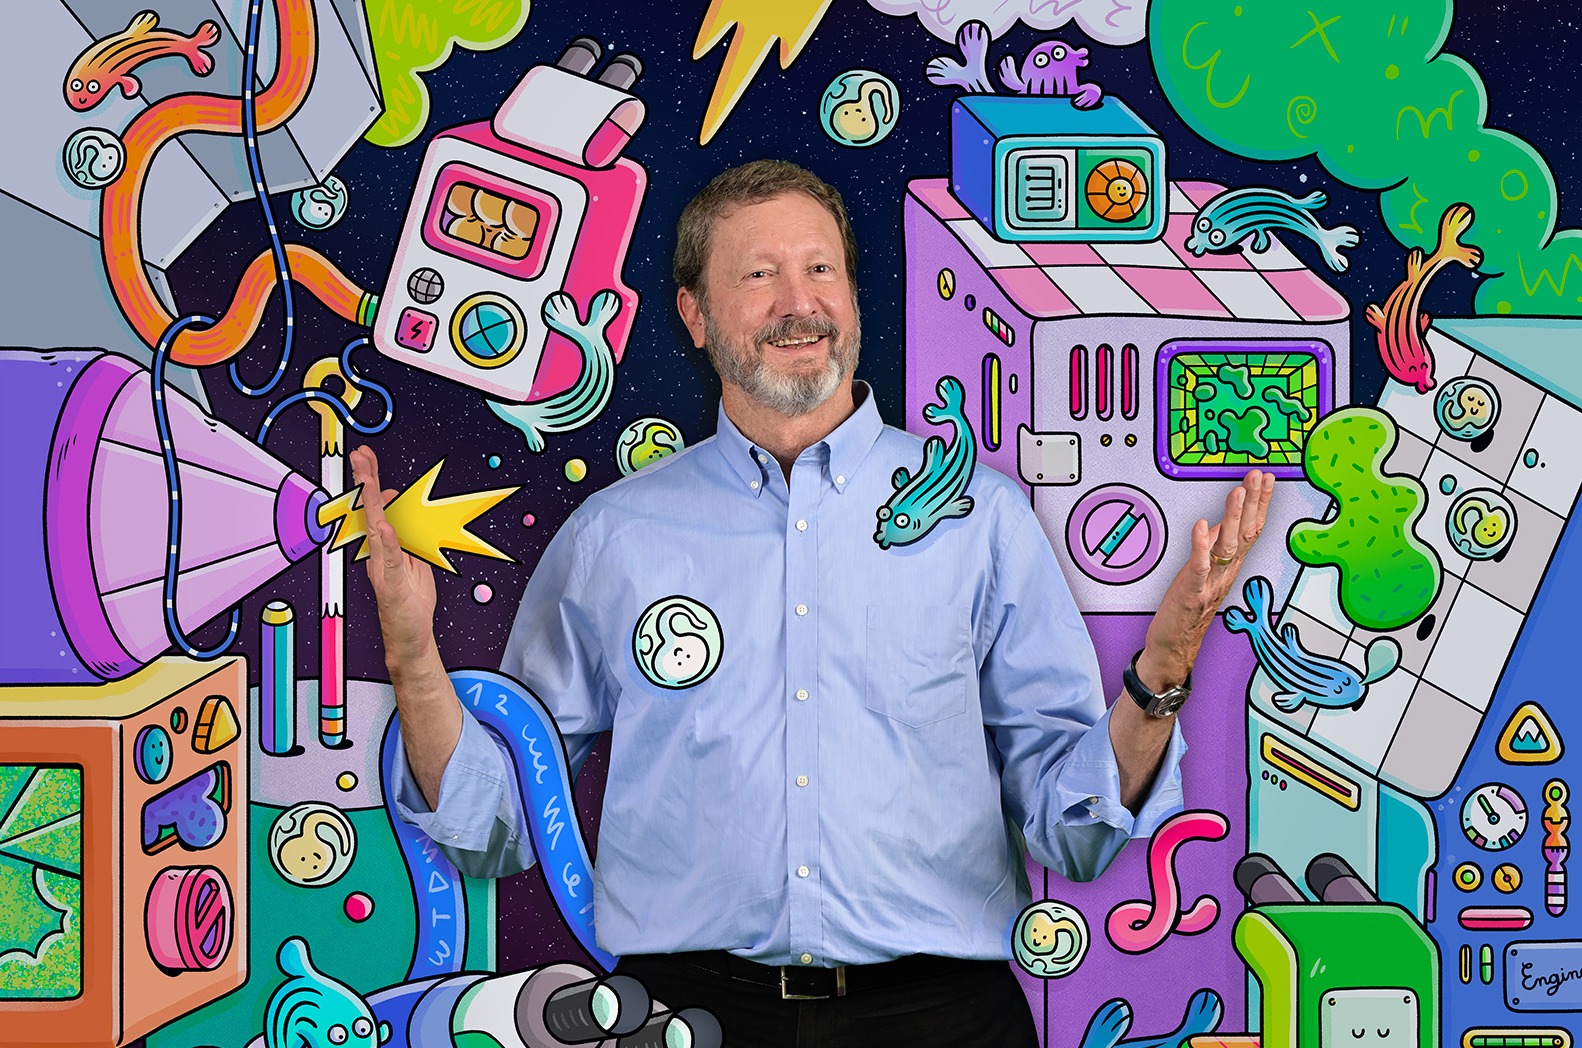 Photo of a person wearing a light blue button down with their arms lifted up, hands hovering by their shoulder, within a colorful illustration of different technologies